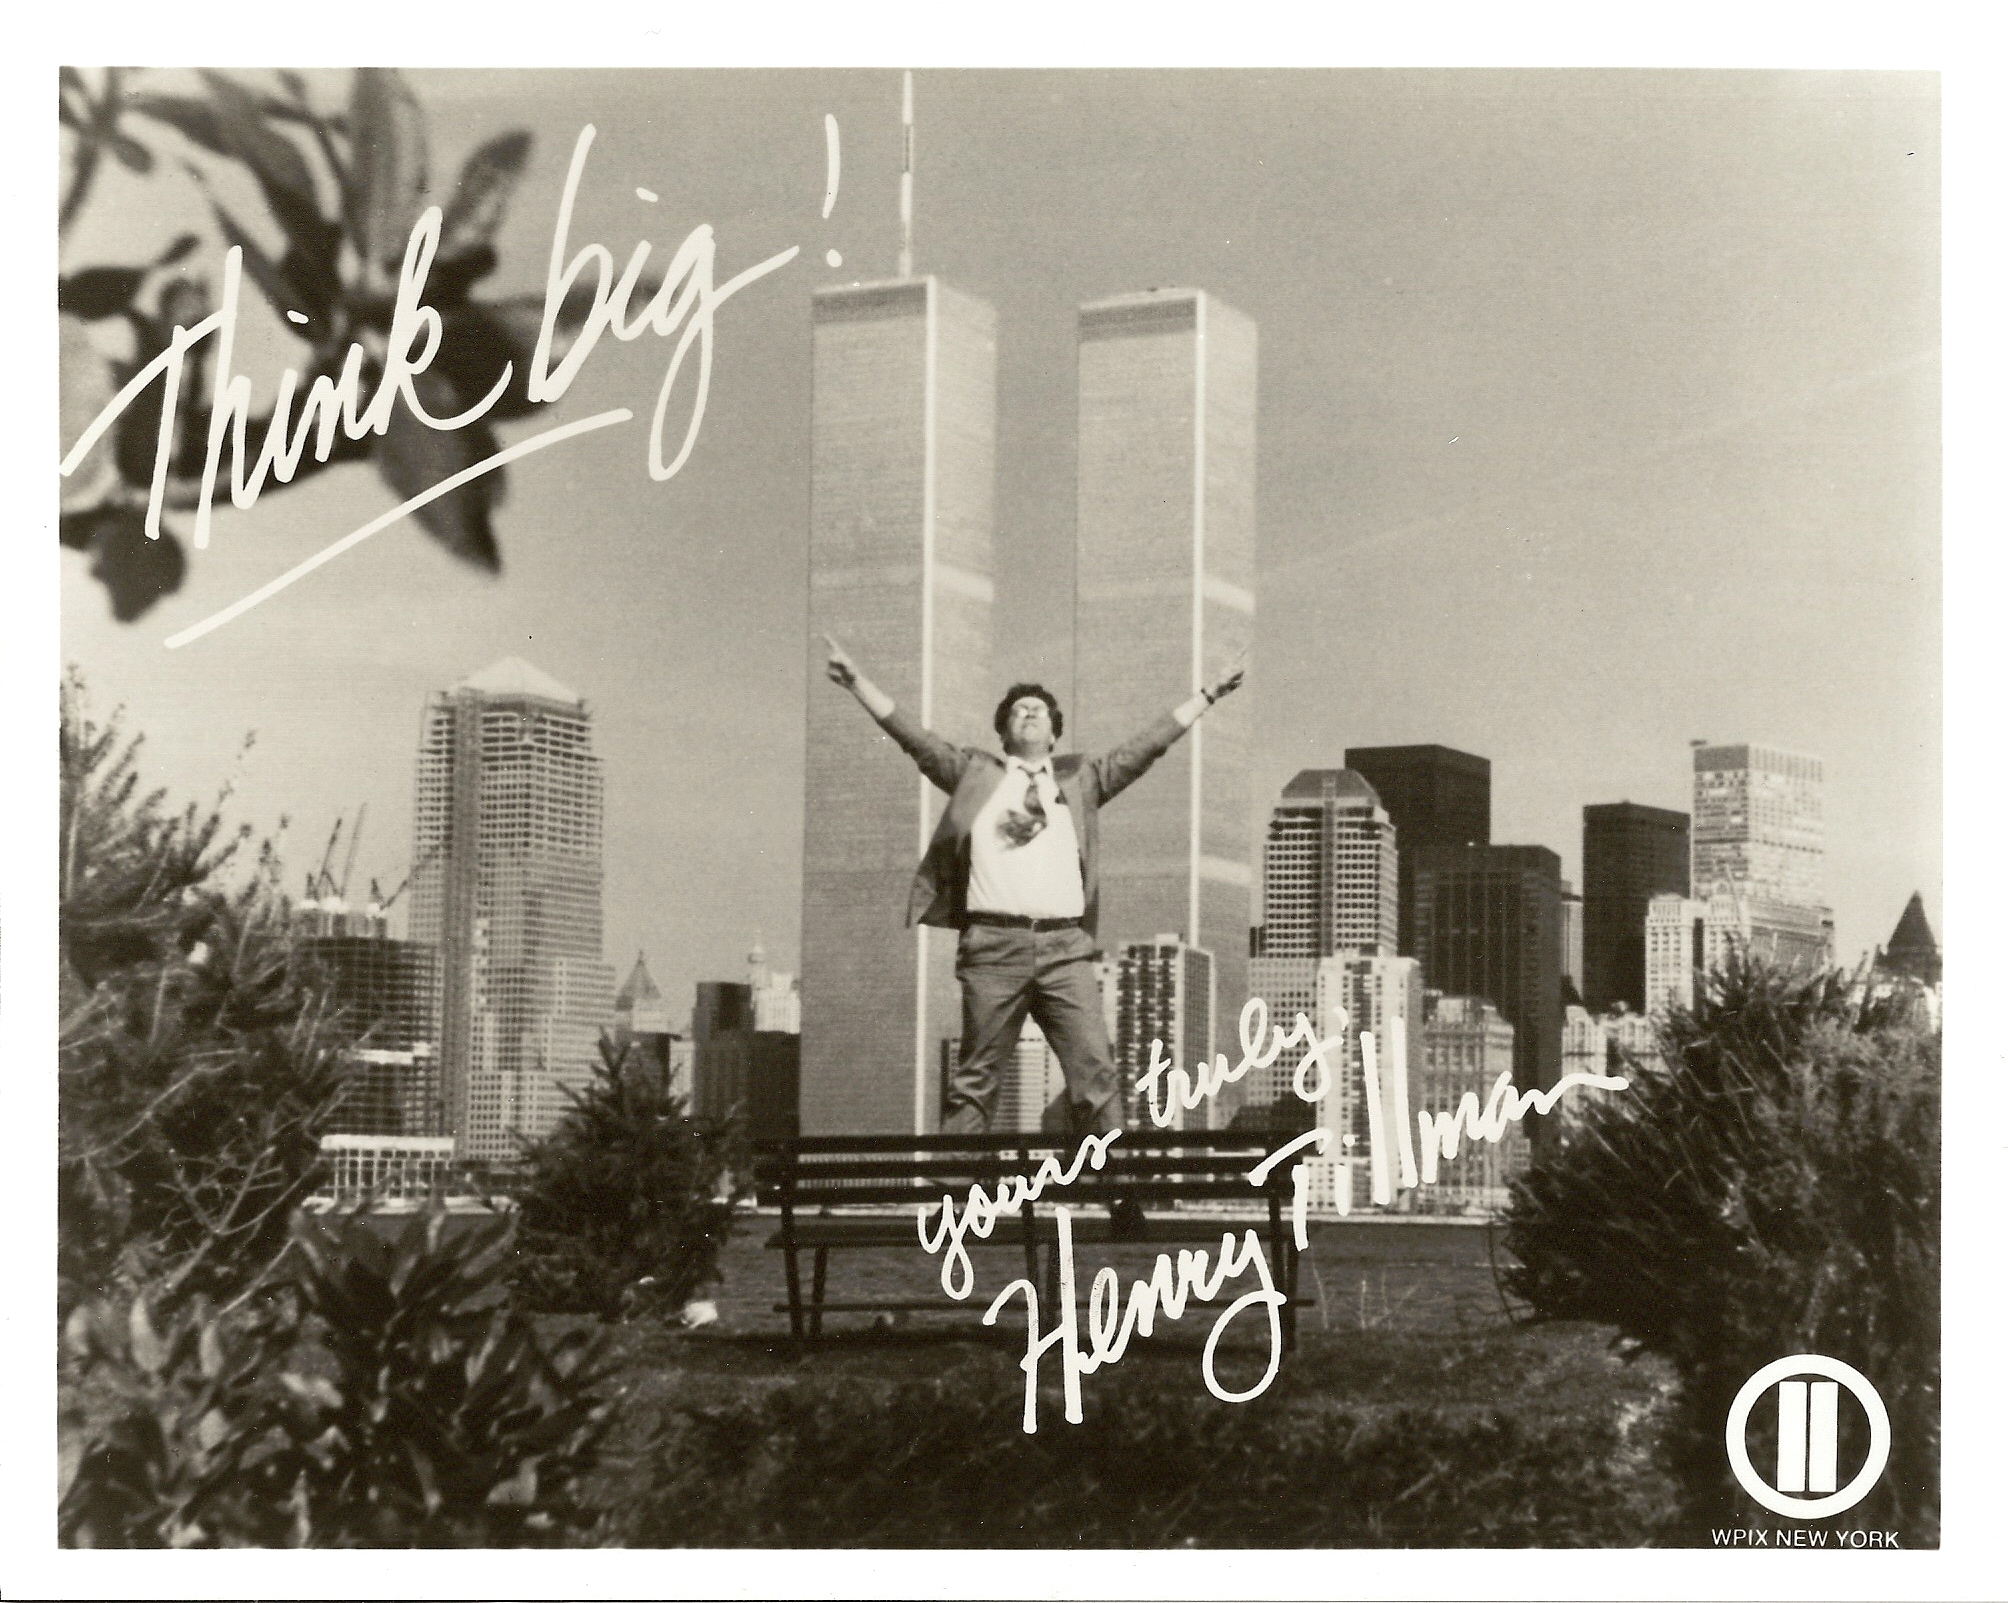 Christopher Chisholm as Henry Tillman looking for the Big Idea in front of the Twin Towers of NYC